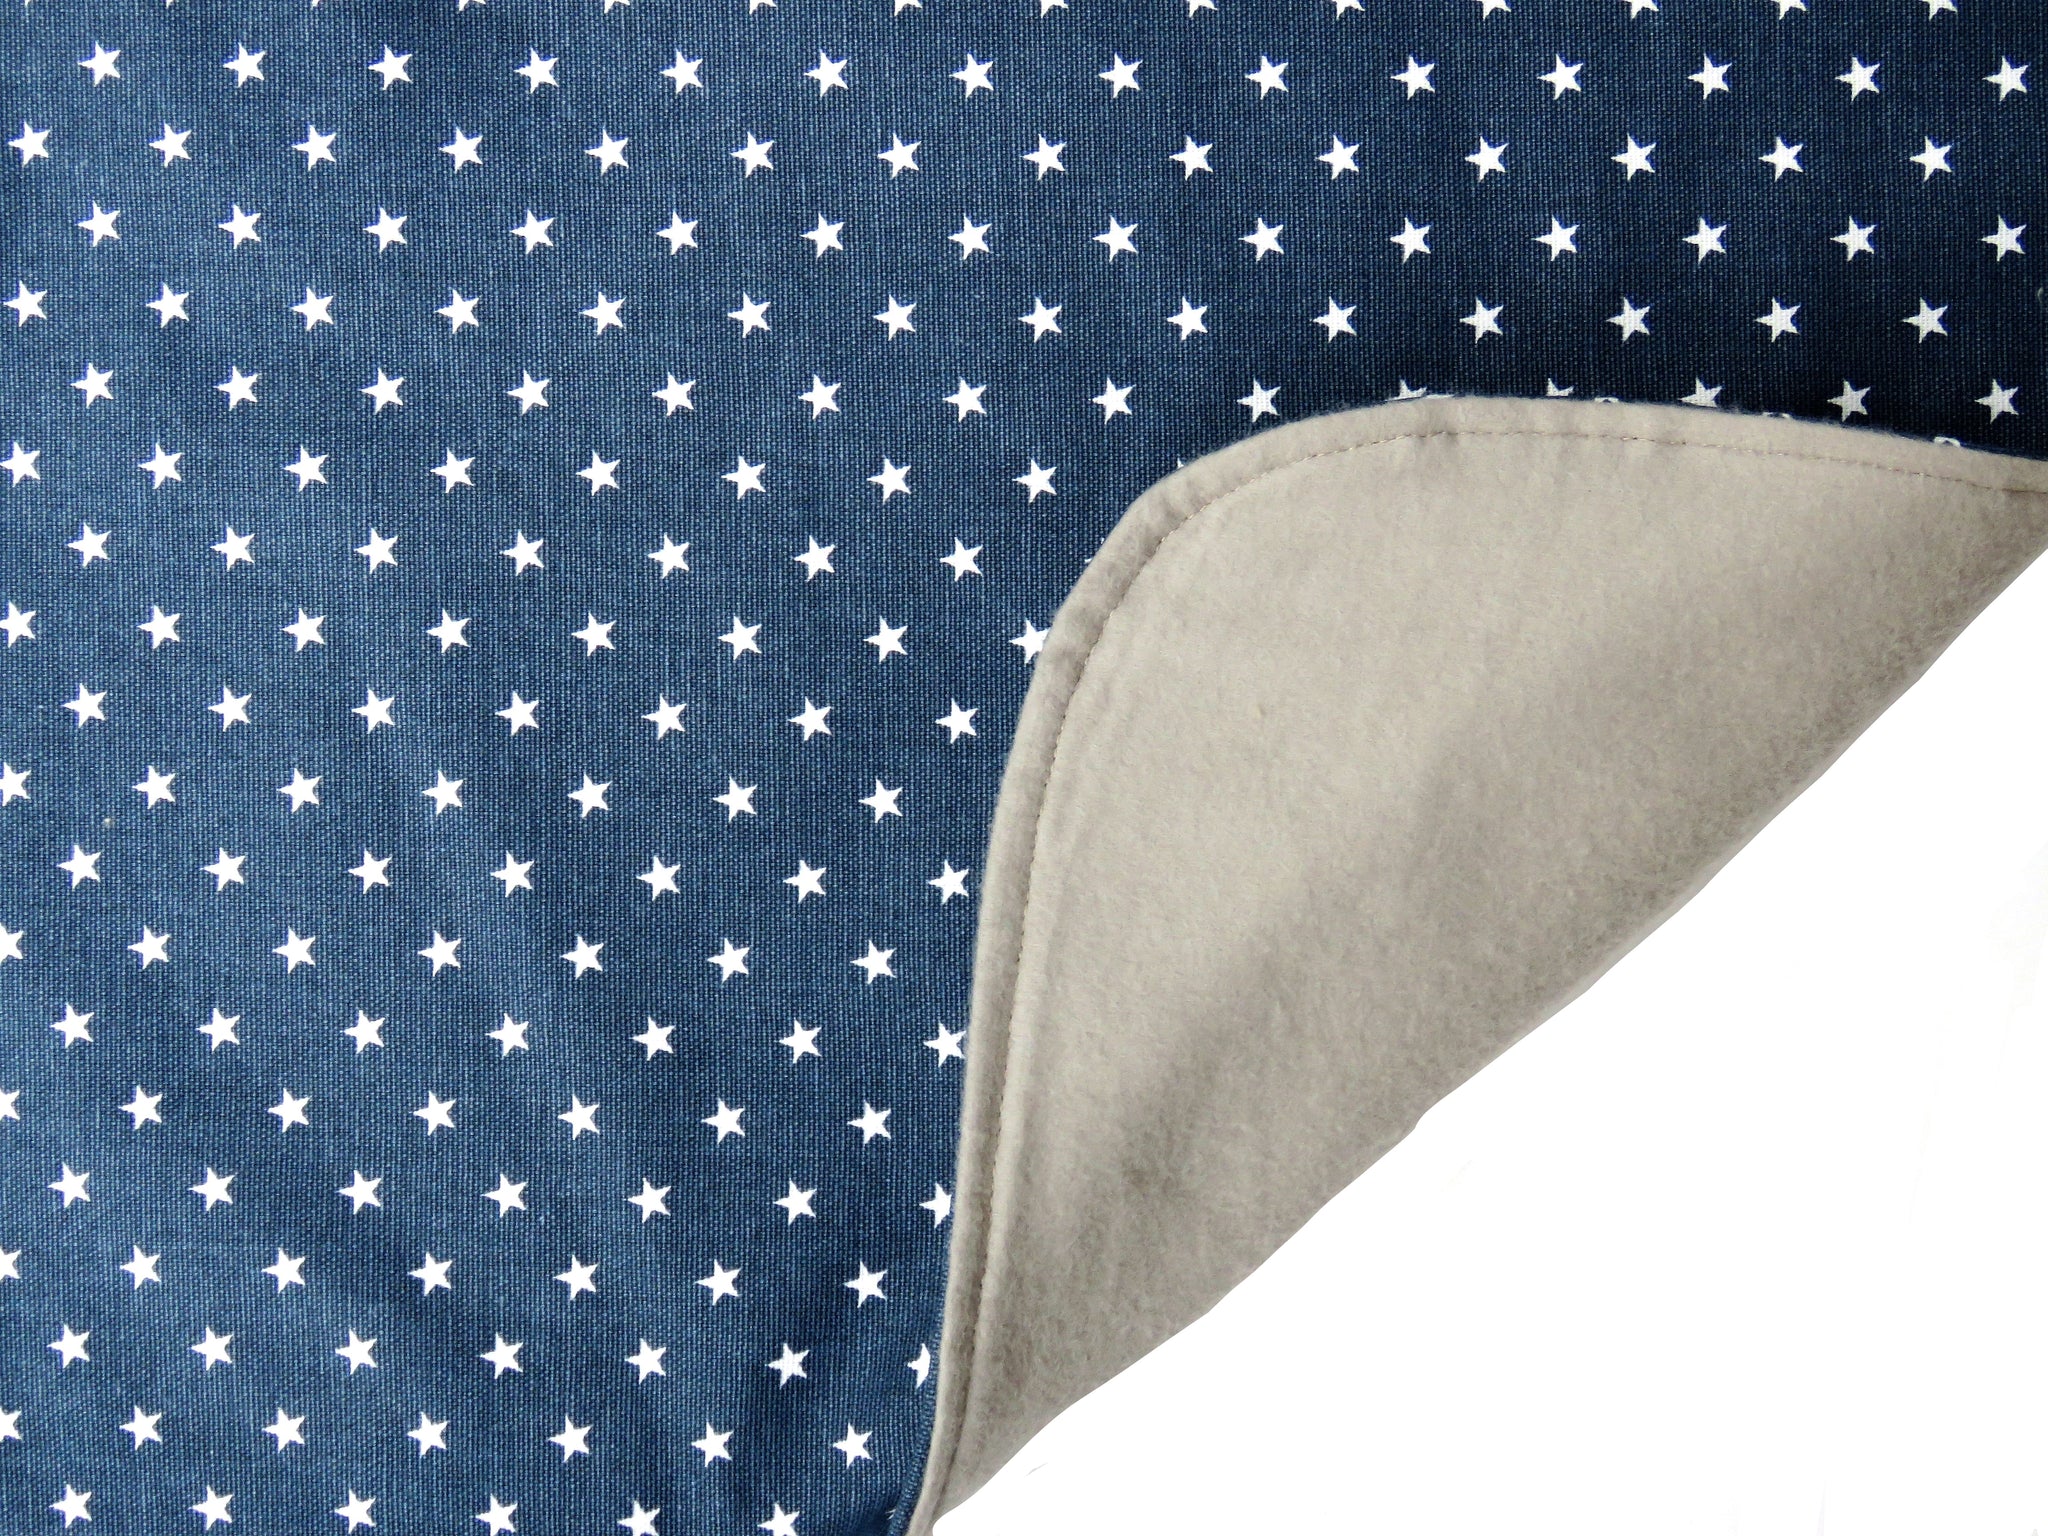 Denim Star is one of our favorite BAVETTE adult bib designs for men and women. Classic blue denim with tiny white stars make a patriotic statement in a stylish, washable, 100% premium cotton dining bib and clothing protector for seniors and adults with special needs.